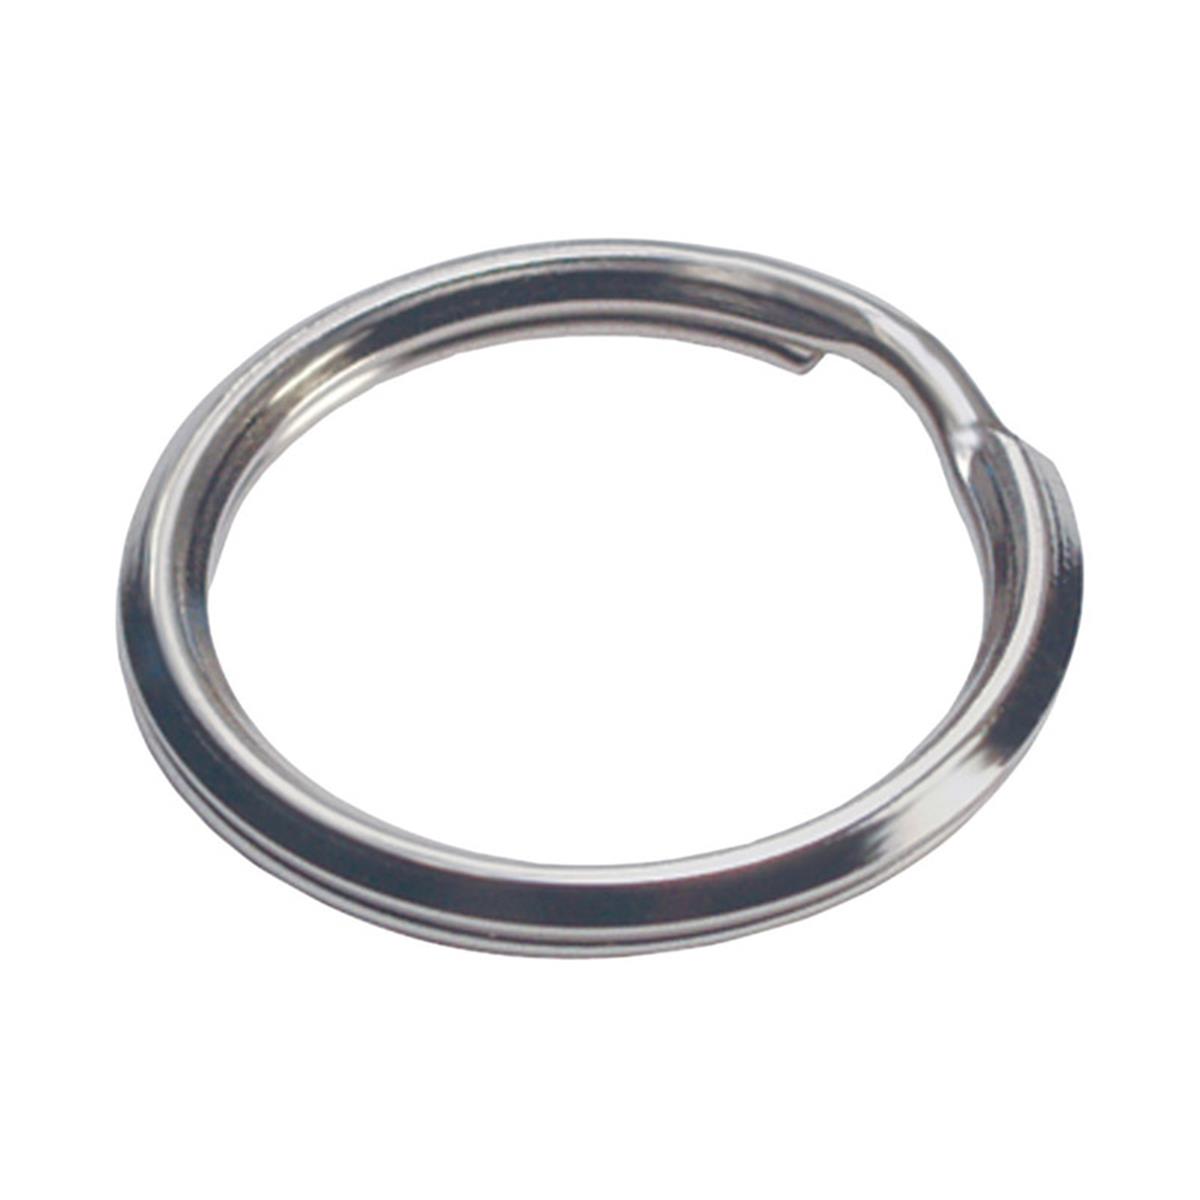 Picture of Hillman 5936646 Tempered Steel Split Rings & Cable Key Ring, Silver - Pack of 50